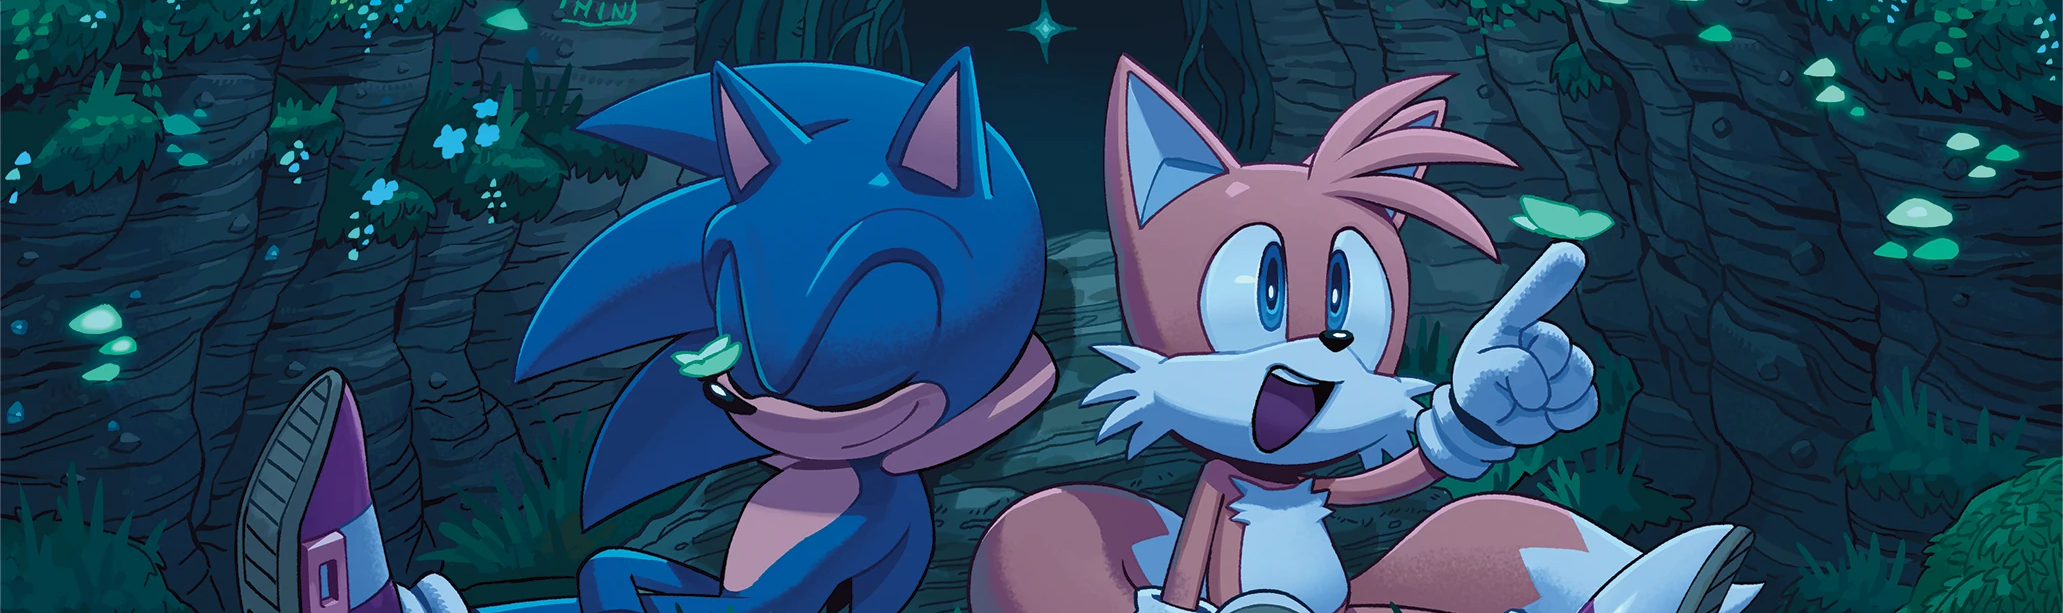 Sonic the Hedgehog Issue #68 Release Date